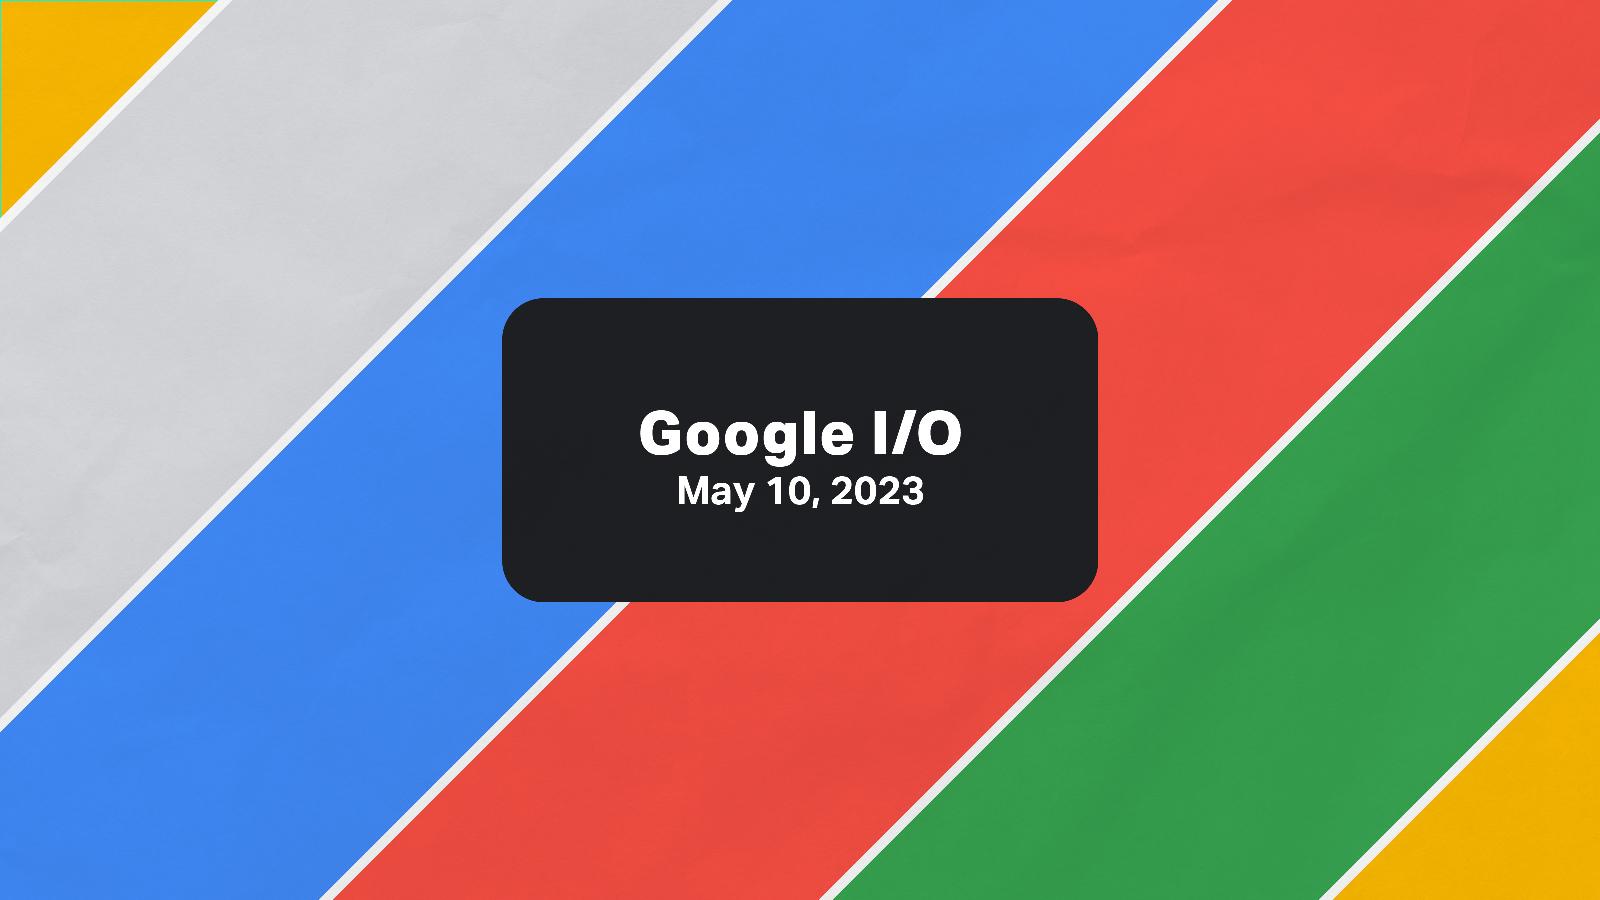 Google I/O 2023 is next week; here’s what we’re expecting